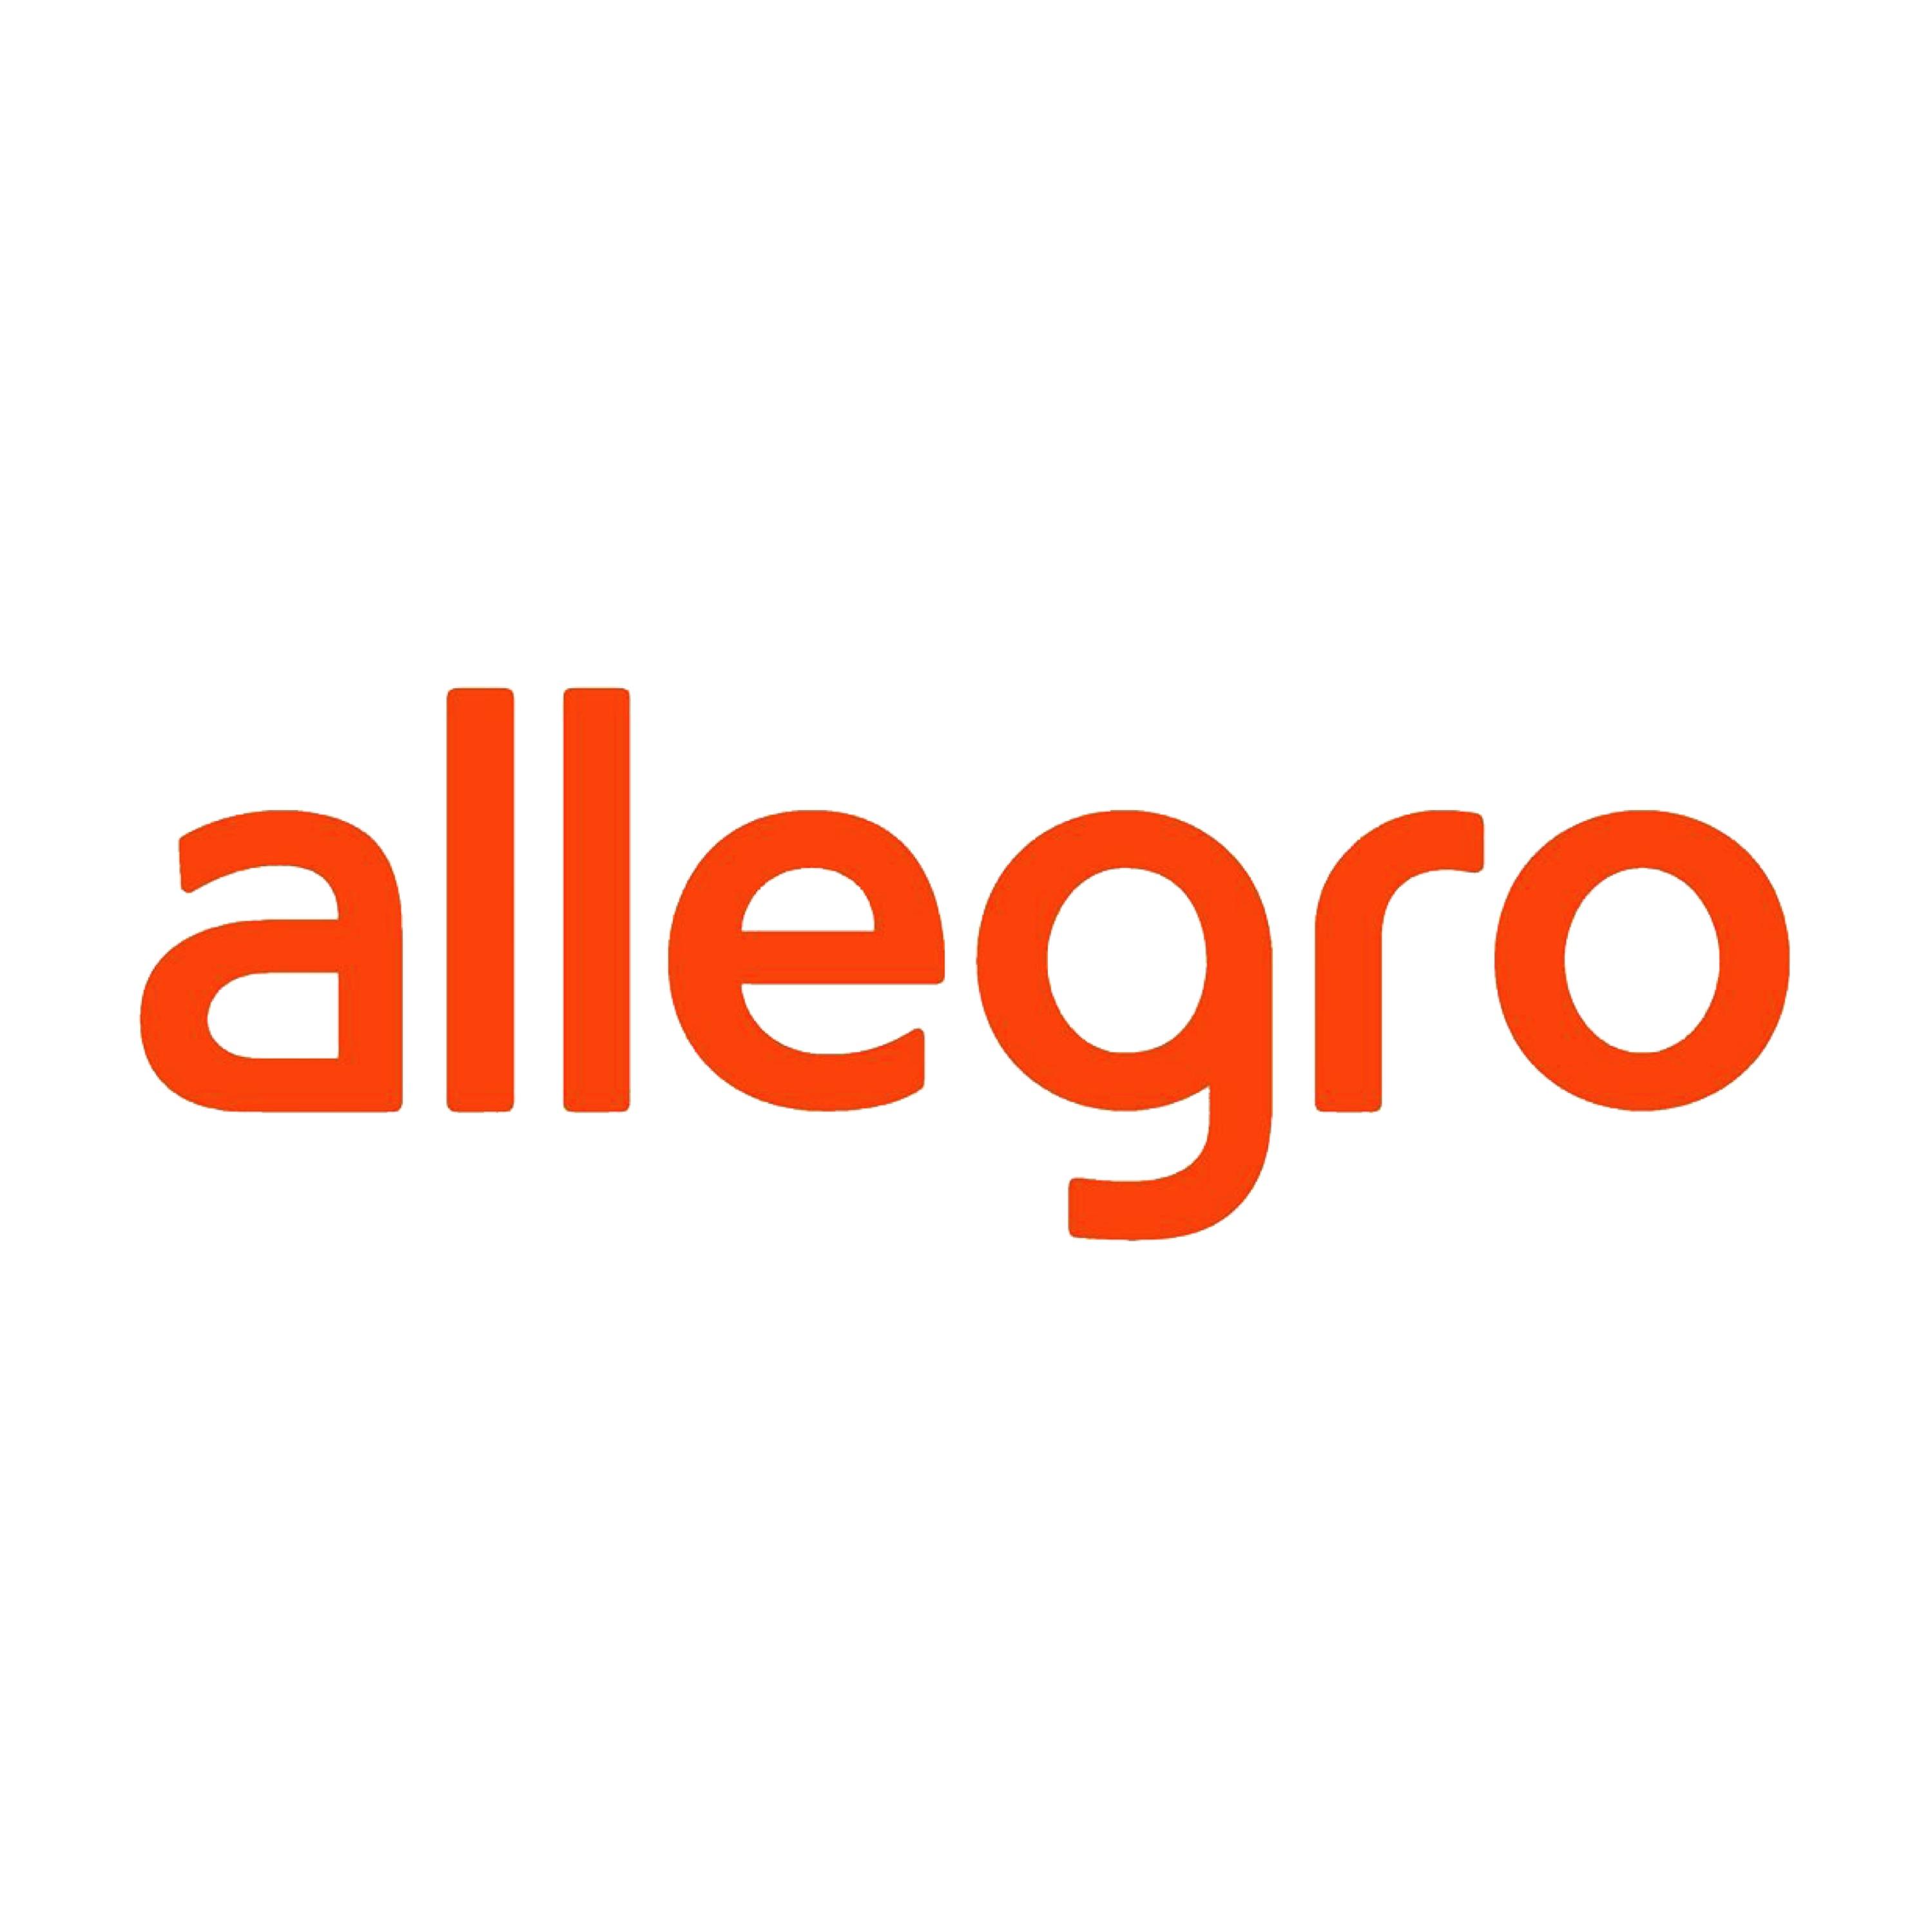 Allegro Pl Sp Z O O Baza Firm Oneplace Marketplanet Pl Oneplace